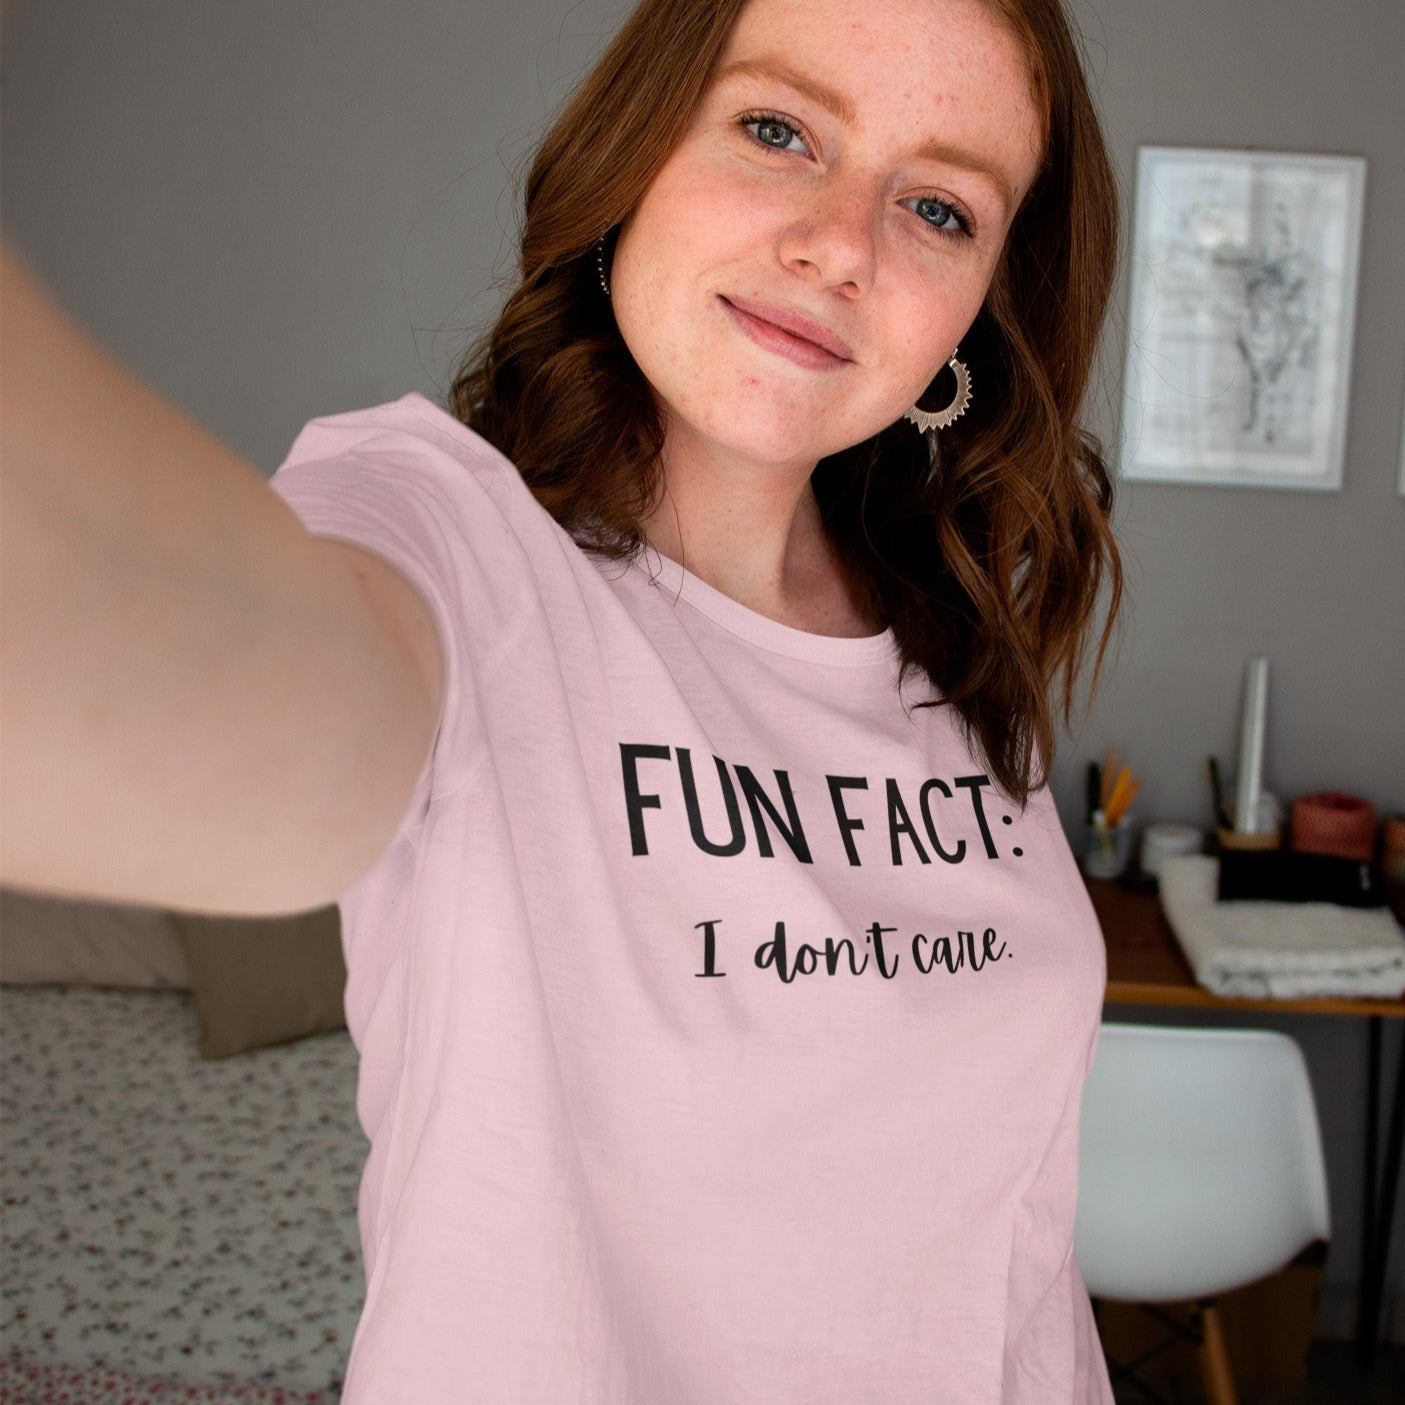 fun-fact-i-dont-care-funny-pink-t-shirt-womens-sarcastic-selfie-mockup-of-a-woman-wearing-a-round-neck-t-shirt-in-her-bedroom